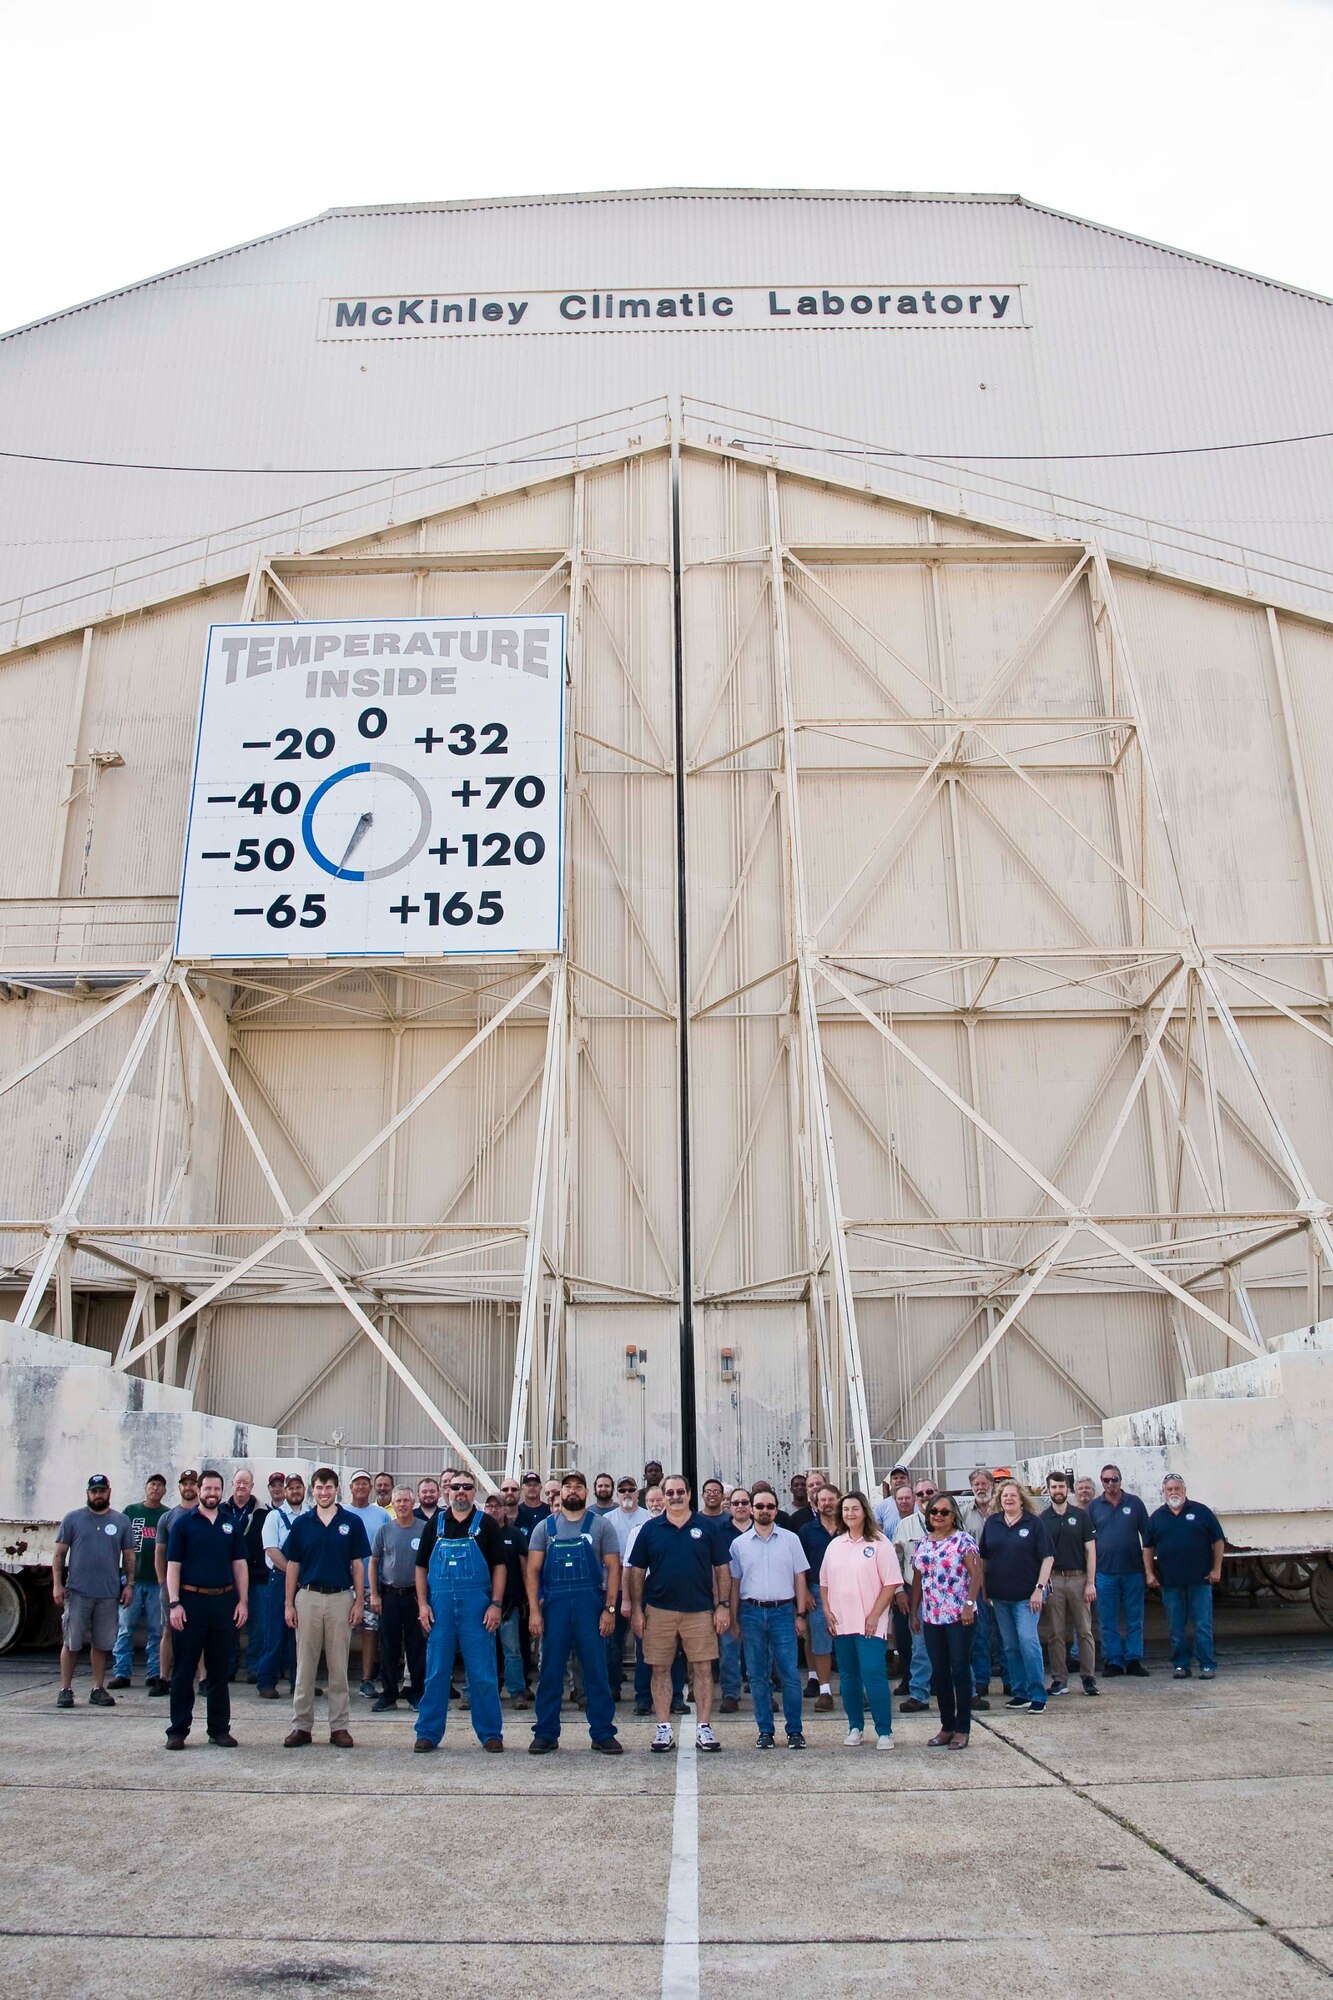 The team at the McKinley Climatic Laboratory, located at Eglin Air Force Base, Florida, pose for a photo outside of the Main Chamber of the facility May 17, 2022. The team recently celebrated the 75th anniversary of the facility. The first tests at the MCL occurred in May 1947. The MCL, which is capable of producing a temperature range from minus 65 degrees Fahrenheit to 165 degrees Fahrenheit, can simulate any climatic environment in the world and is used to conduct a variety of climatic testing for the Department of Defense, other government agencies and private industry. The MCL is operated by the 717th Test Squadron, 804th Test Group, Arnold Engineering Development Complex. (U.S. Air Force photo by Bruce Hoffman)